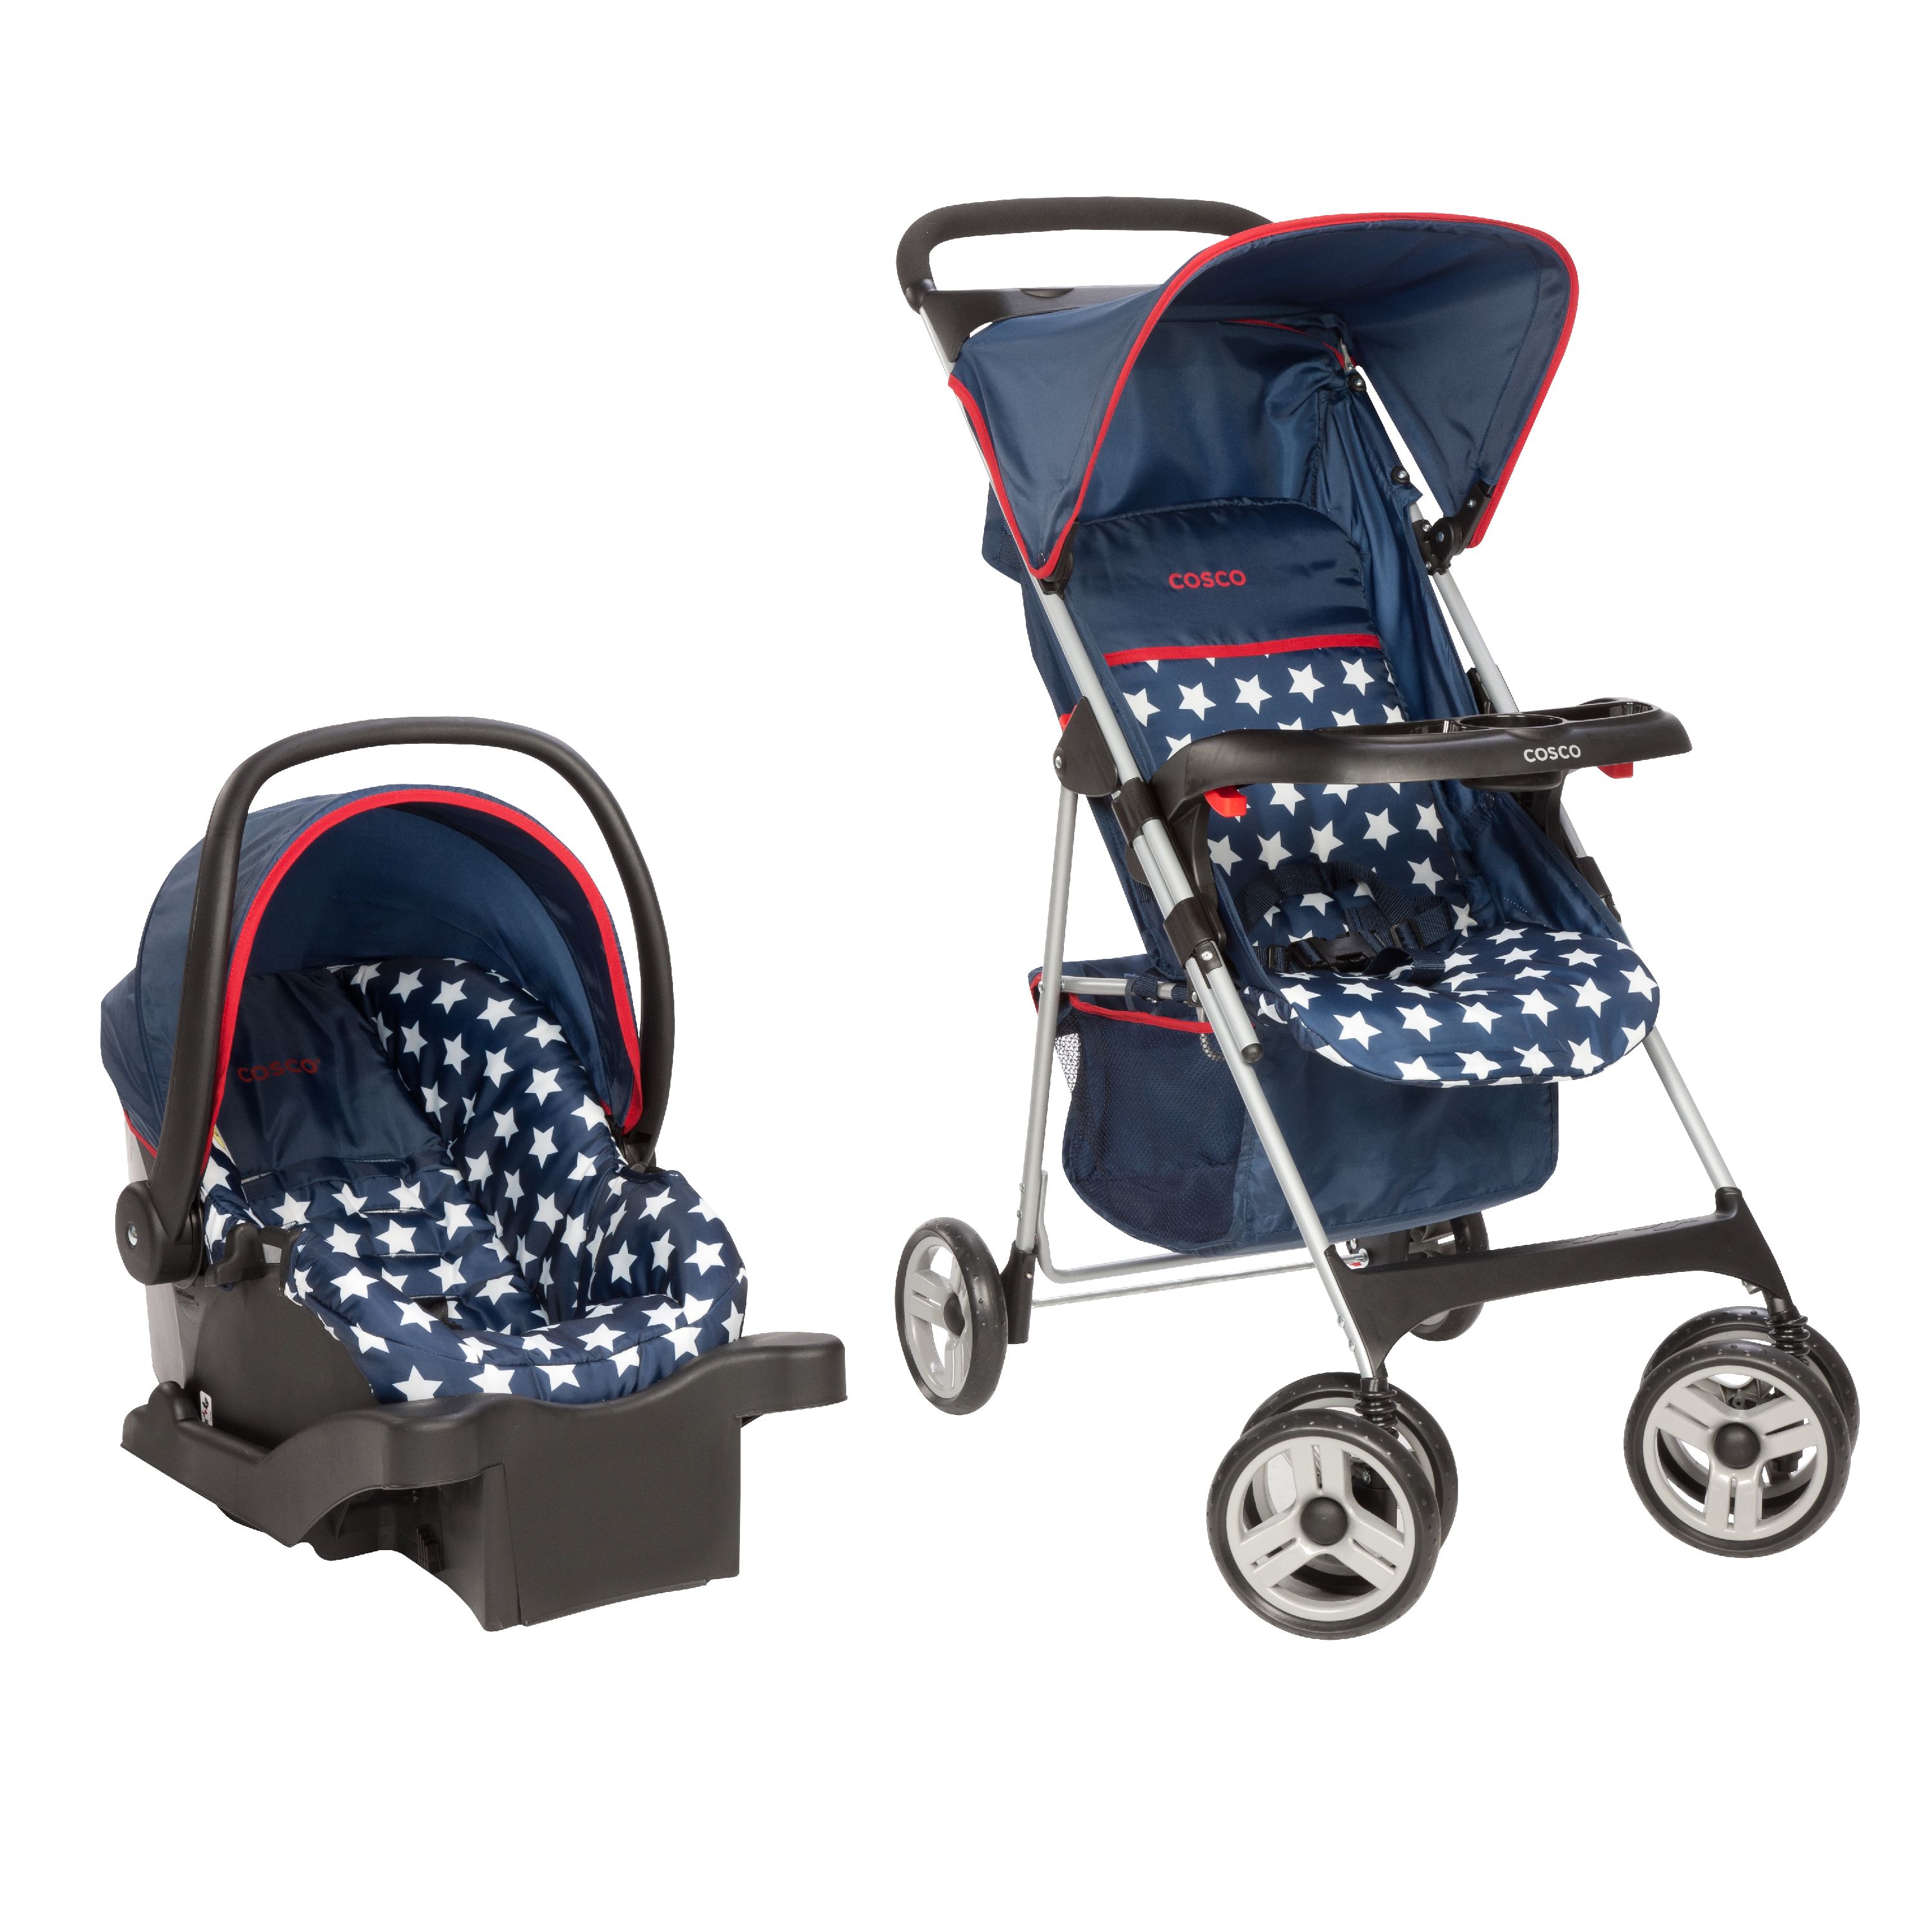 Cosco Commuter Compact Travel System - image 1 of 6